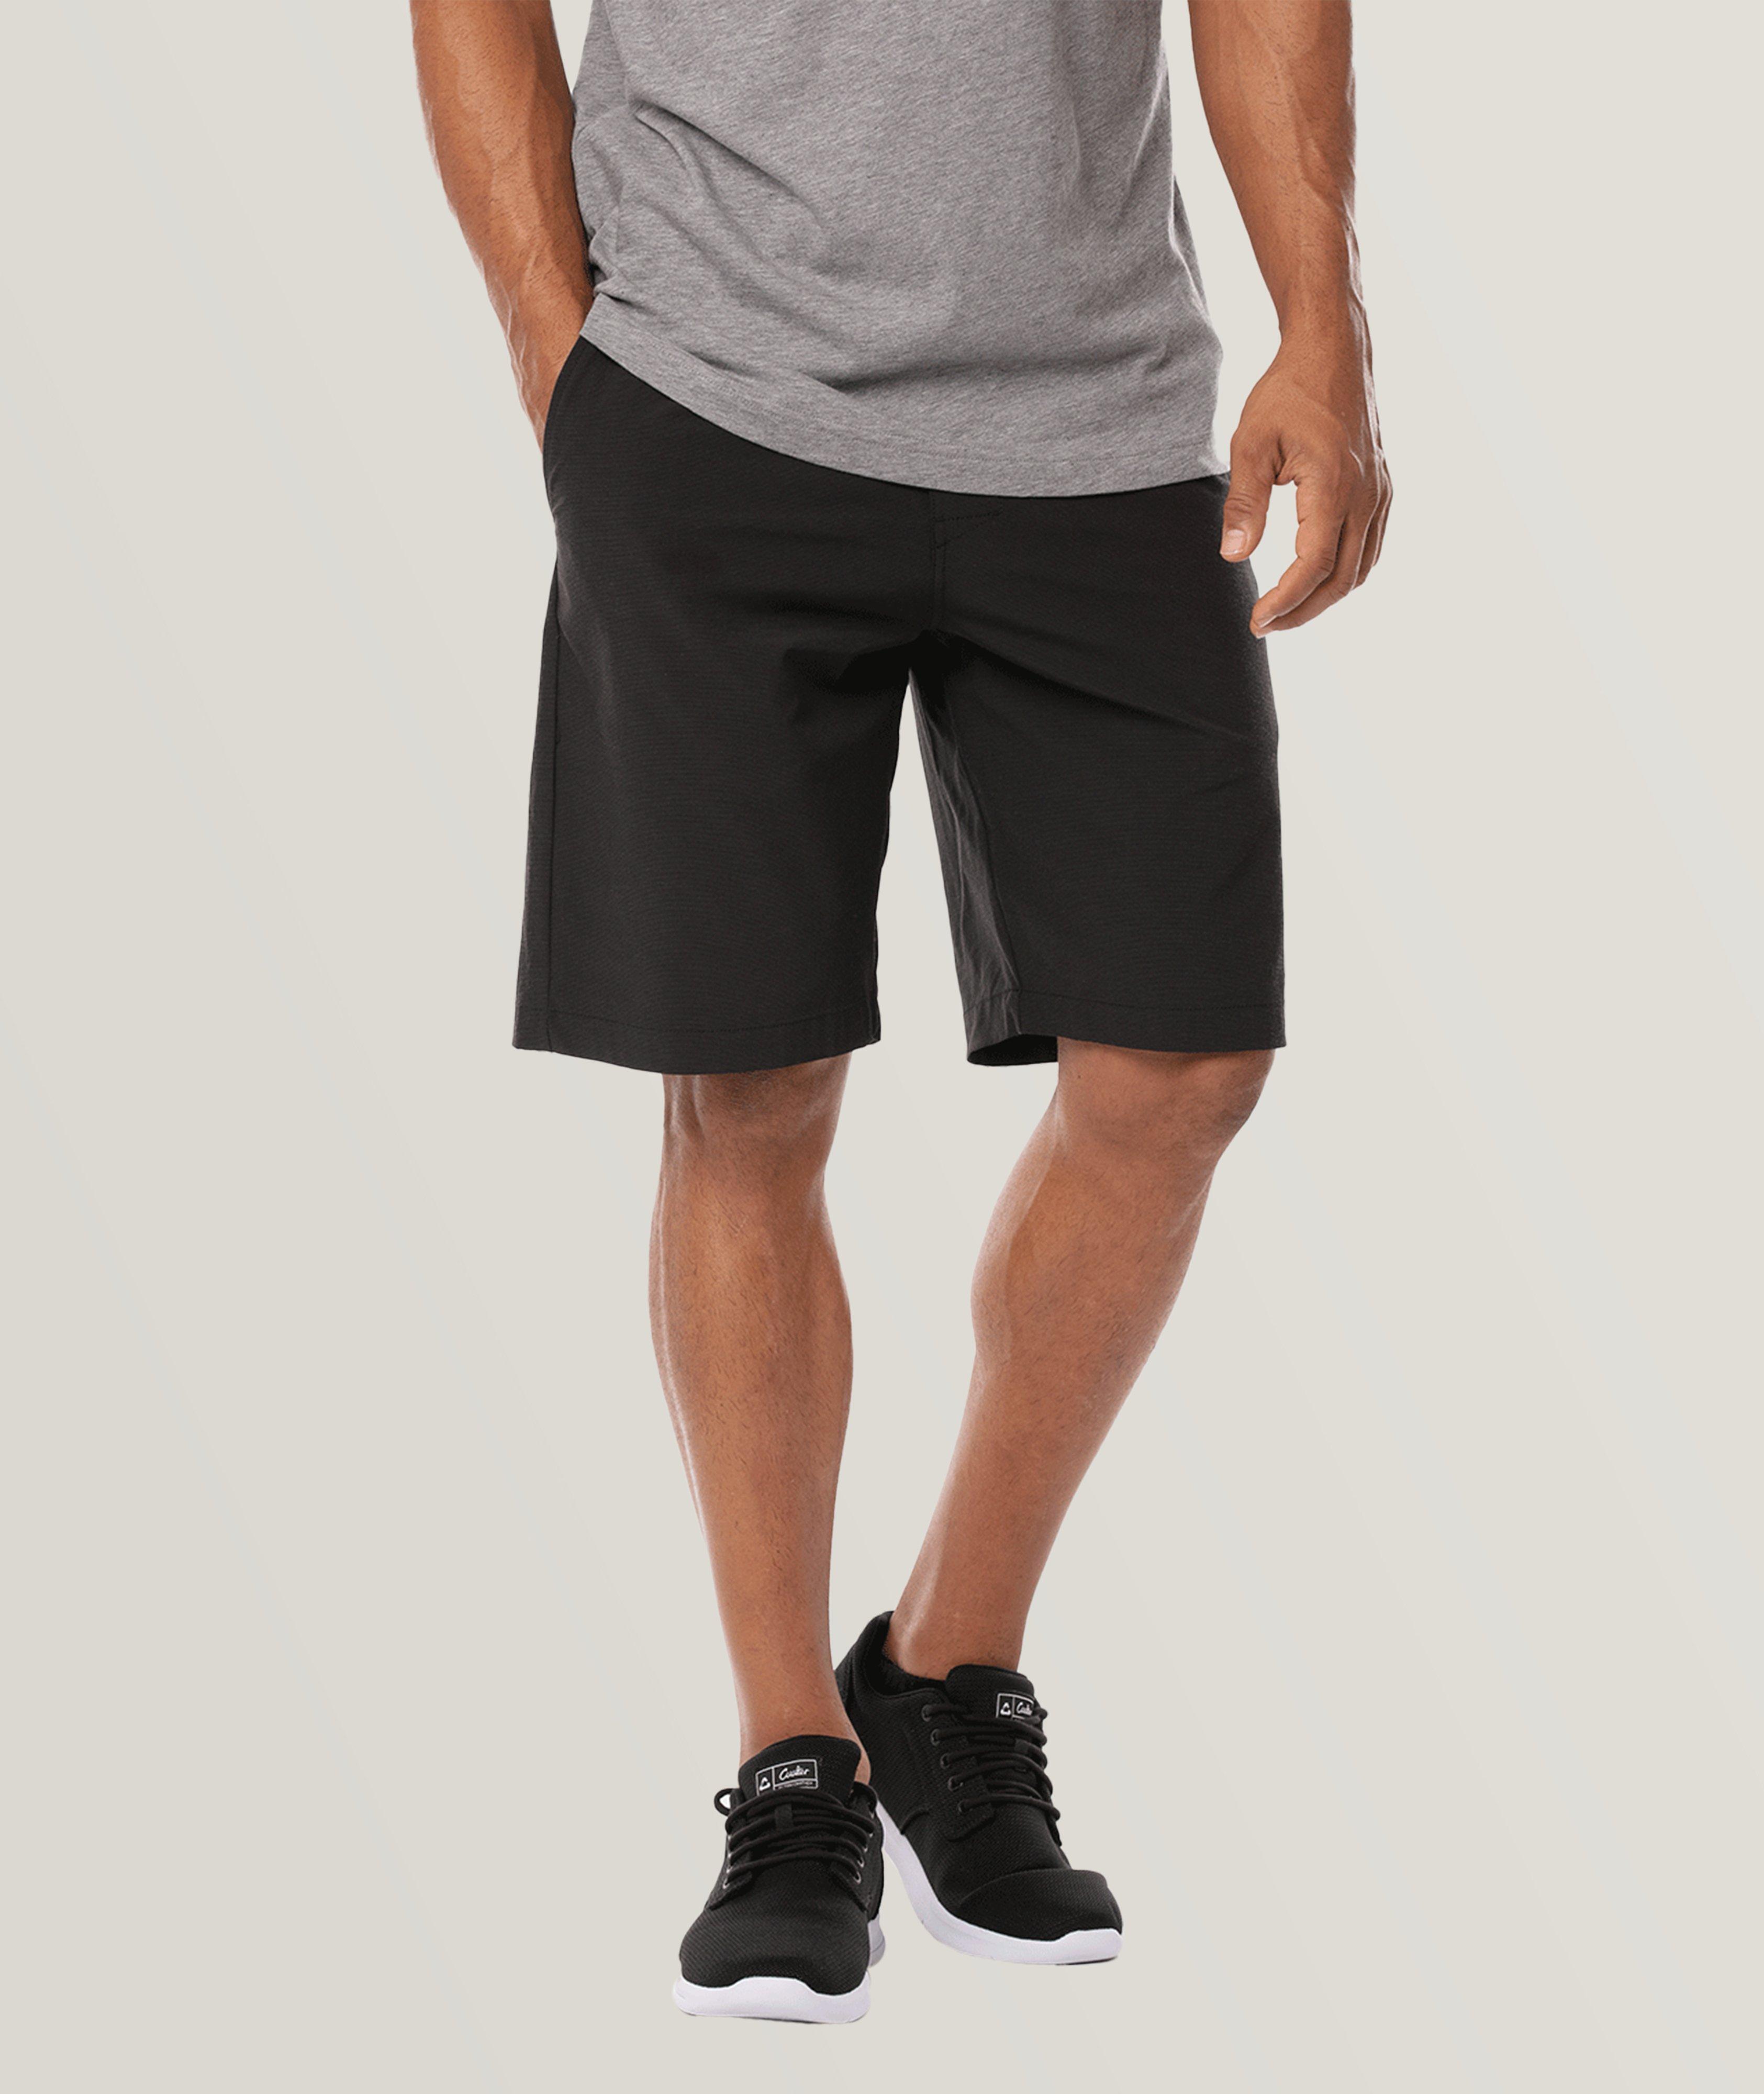 Beck Stretch-Cotton Shorts image 0